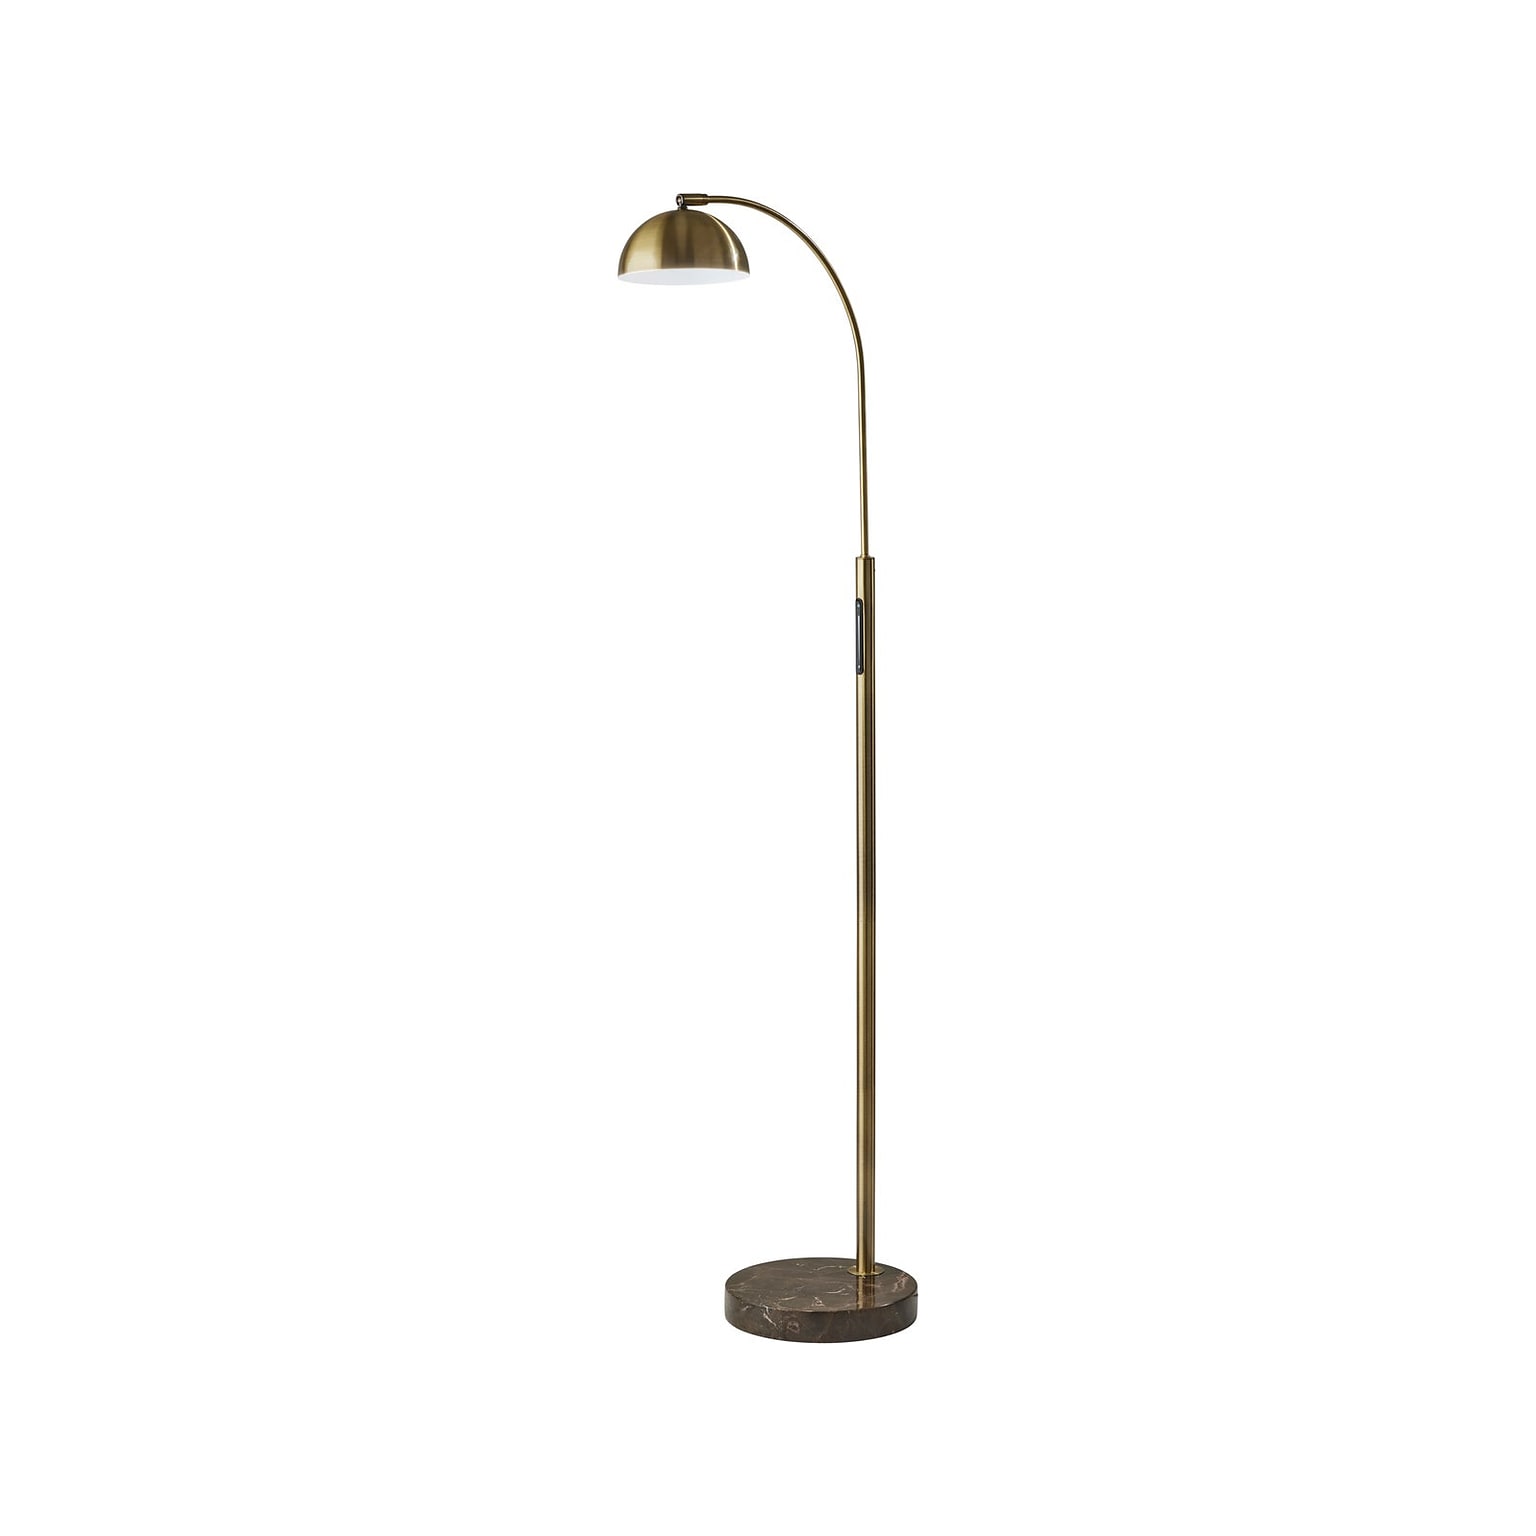 Adesso Bolton 57.75 Antique Brass Floor Lamp with Dome Shade (4307-21)